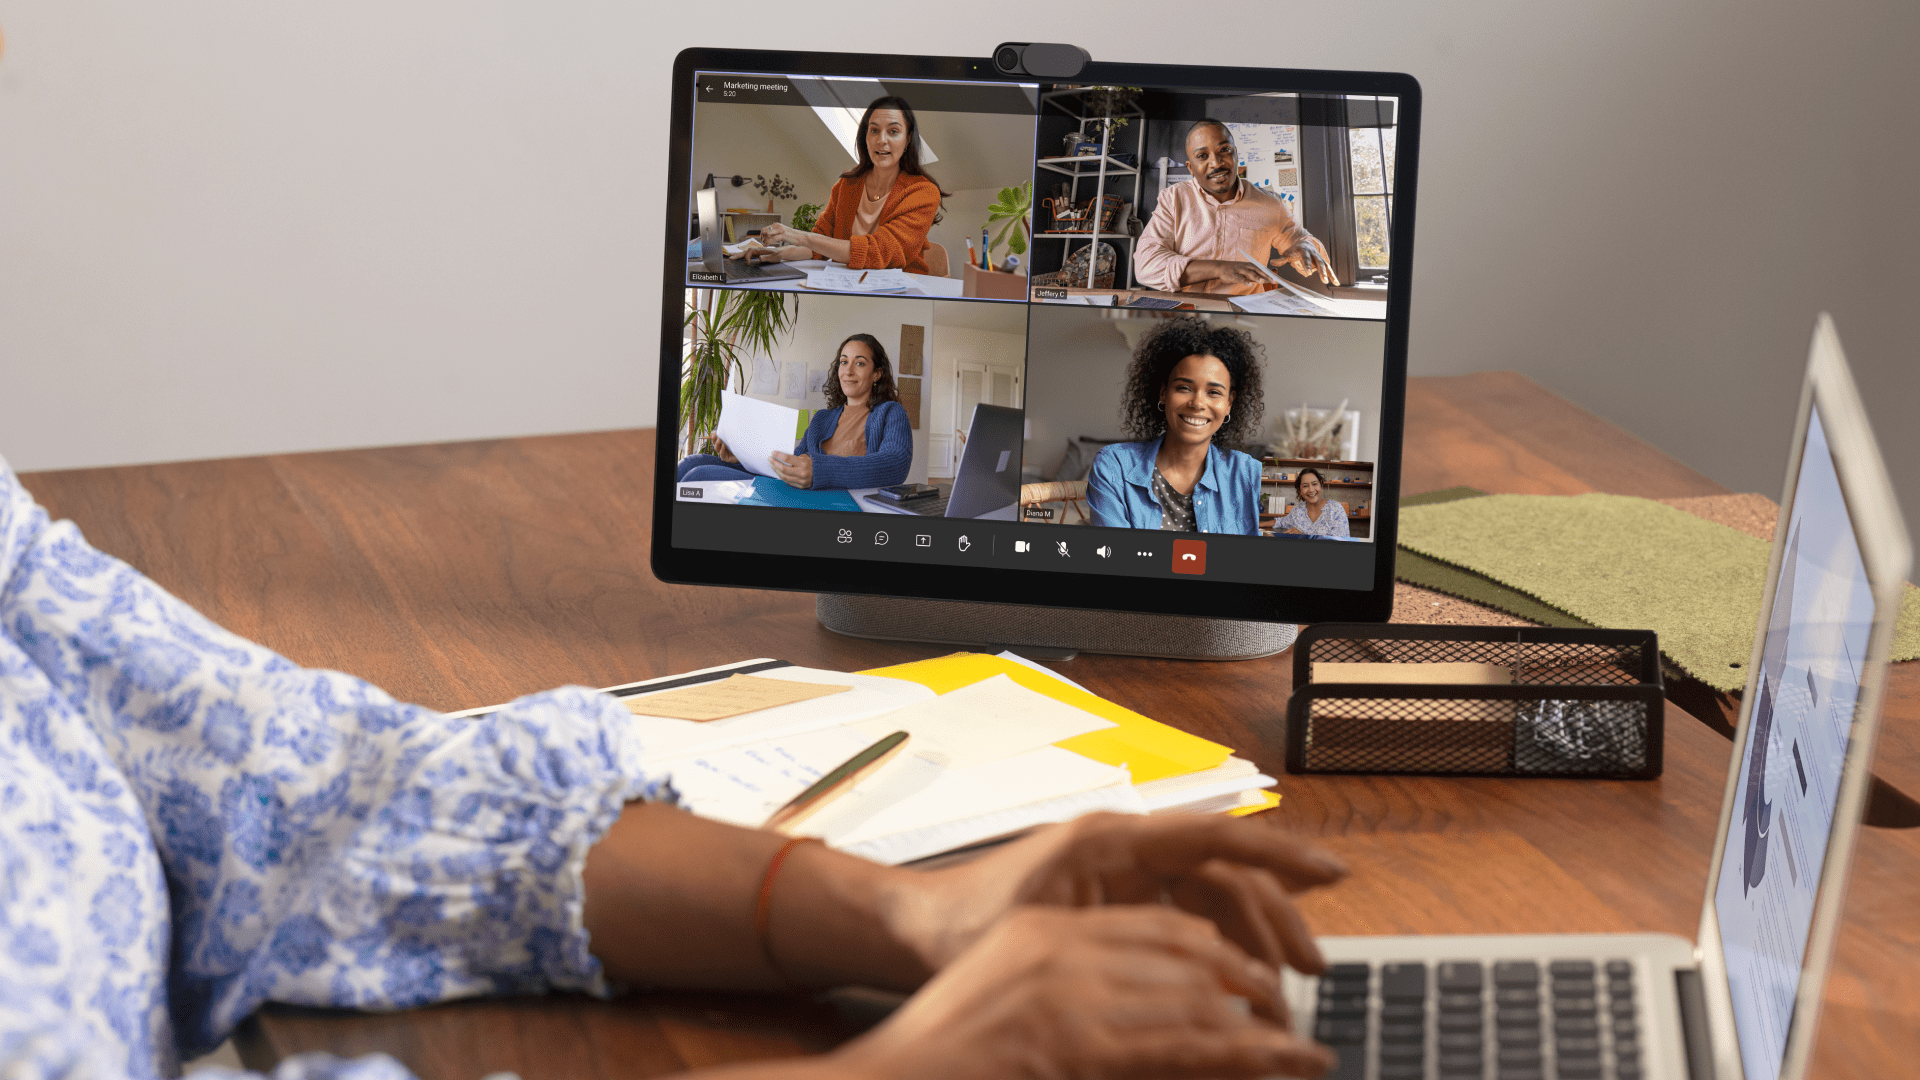 Facebook's Portal devices, including the new Portal+, will be able to run Microsoft Teams this December.